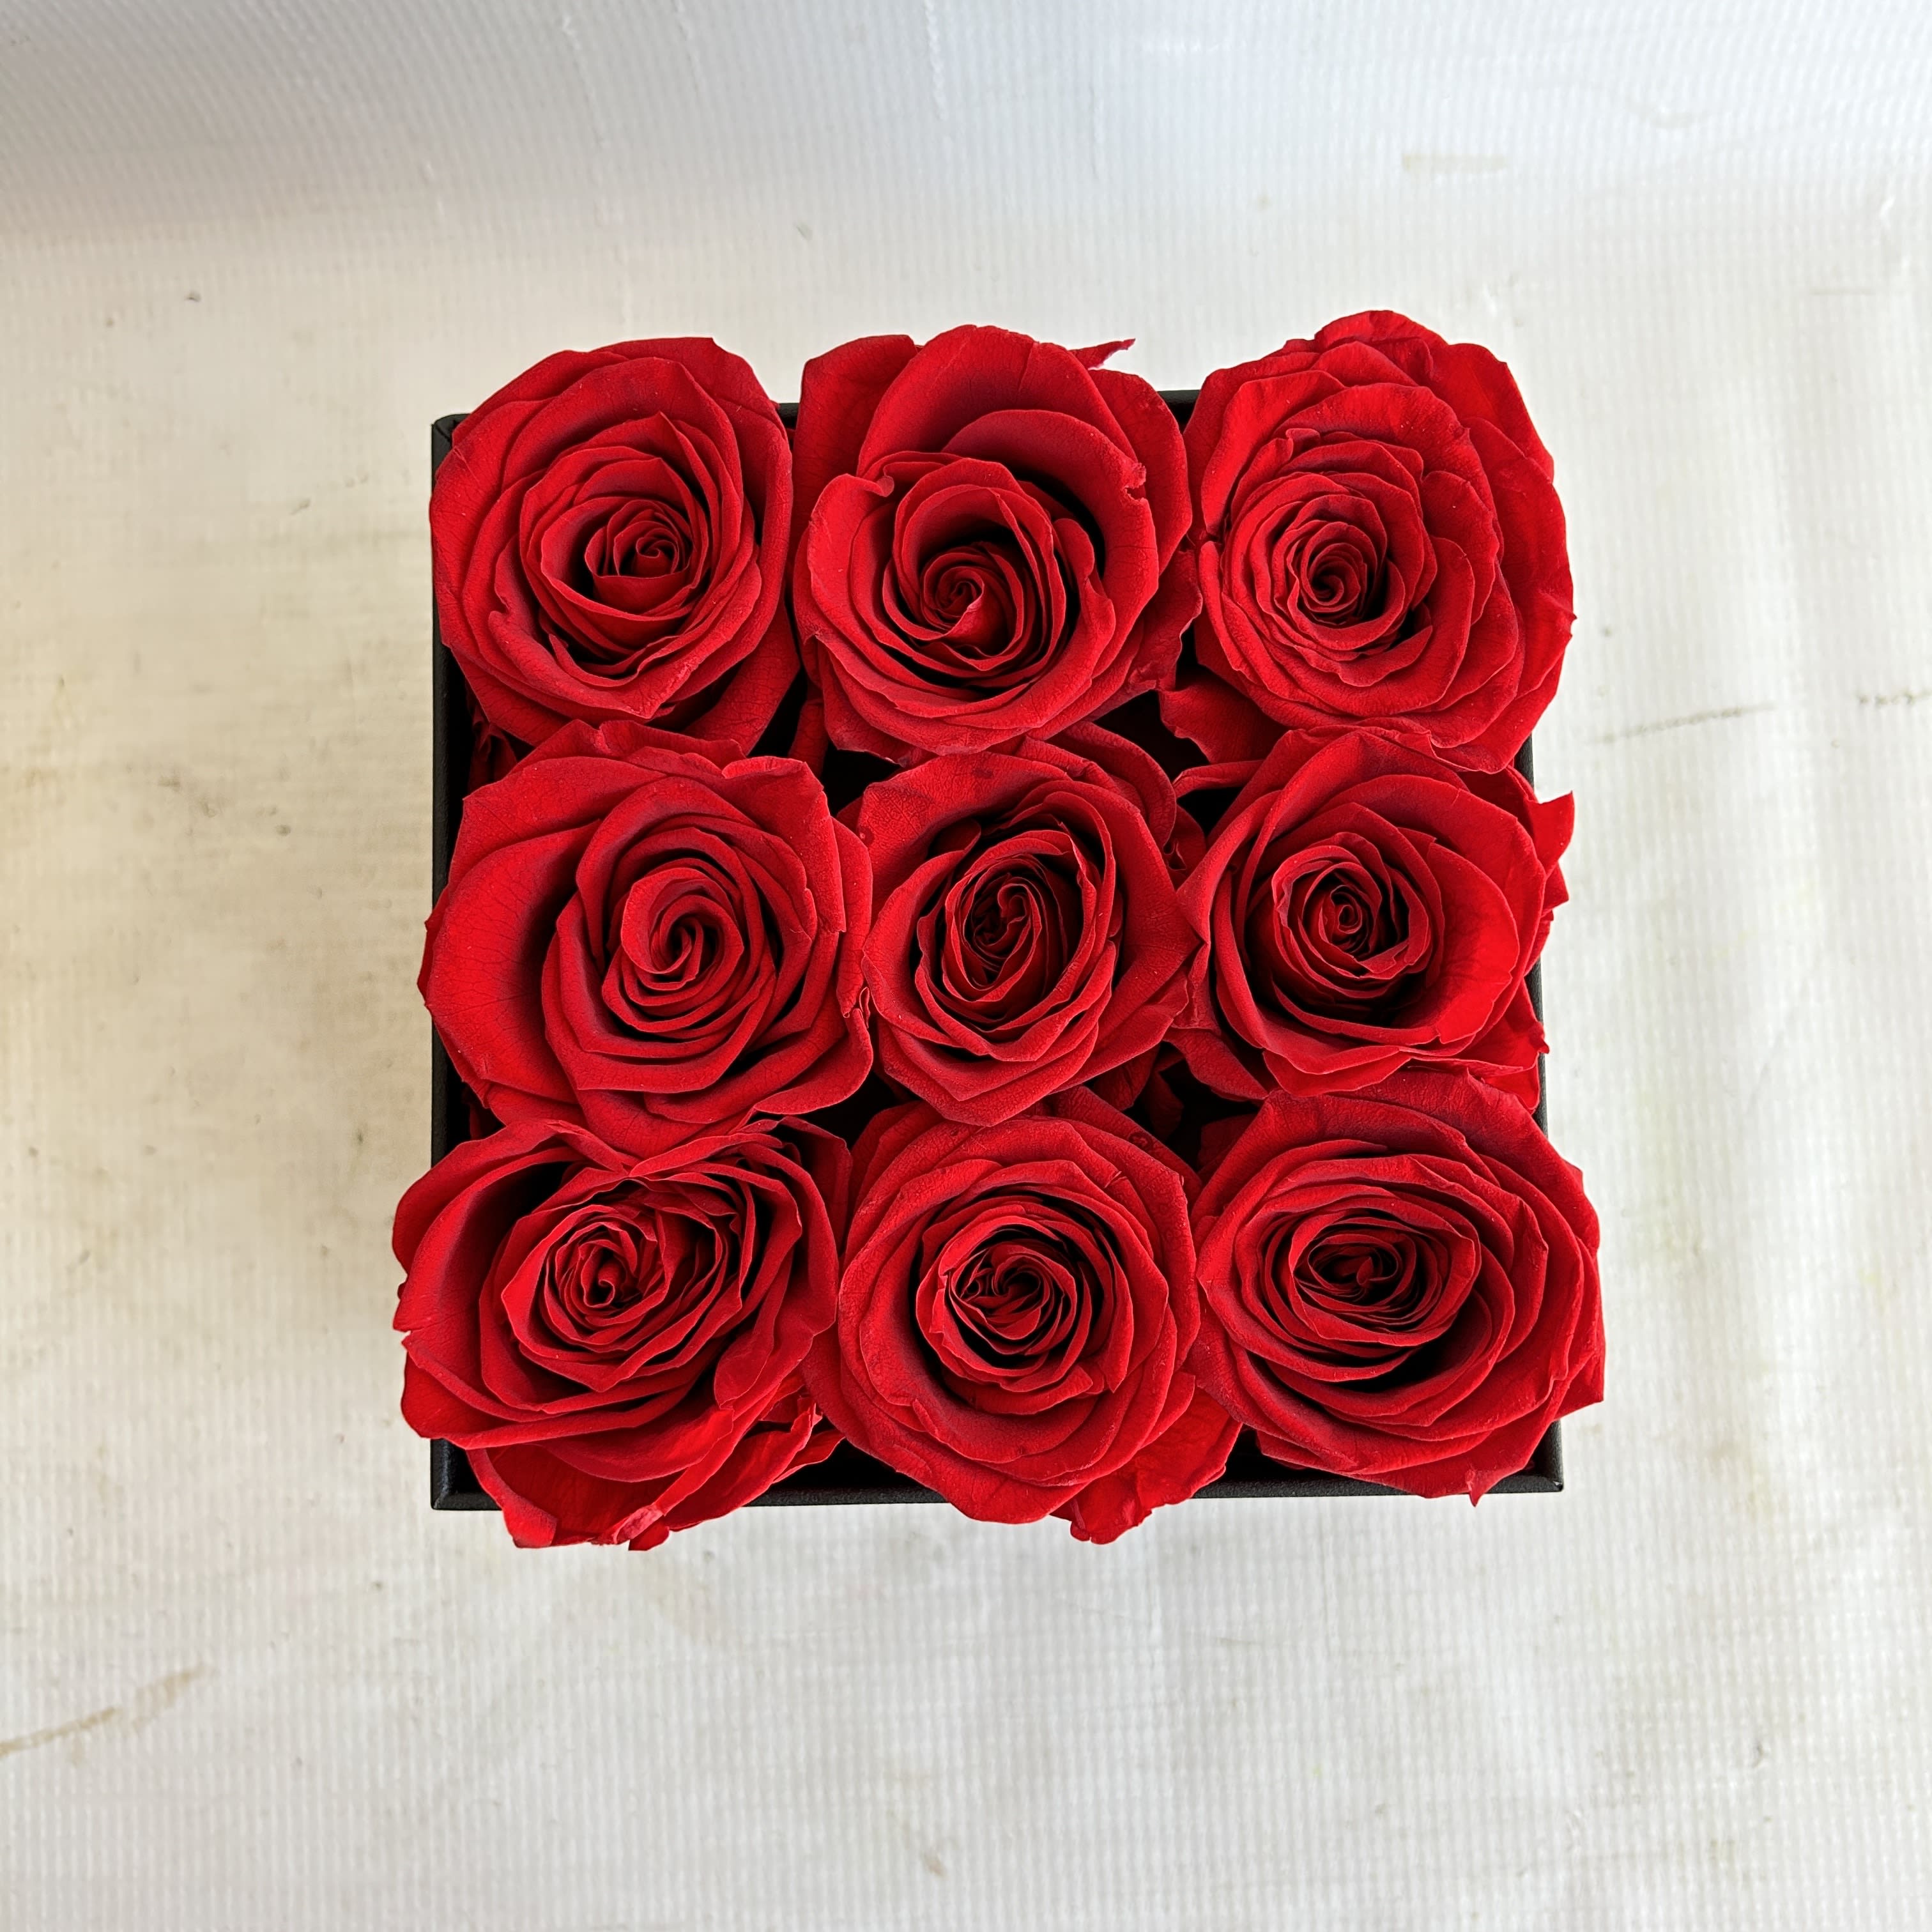 Permanent Roses Box - Elevate the art of gifting with our Permanent Roses Box. Encased in a square-shaped box, these eternal roses radiate love and passion, forever. Meticulously preserved to maintain their beauty, they require no upkeep. A timeless symbol of affection that lasts a lifetime.